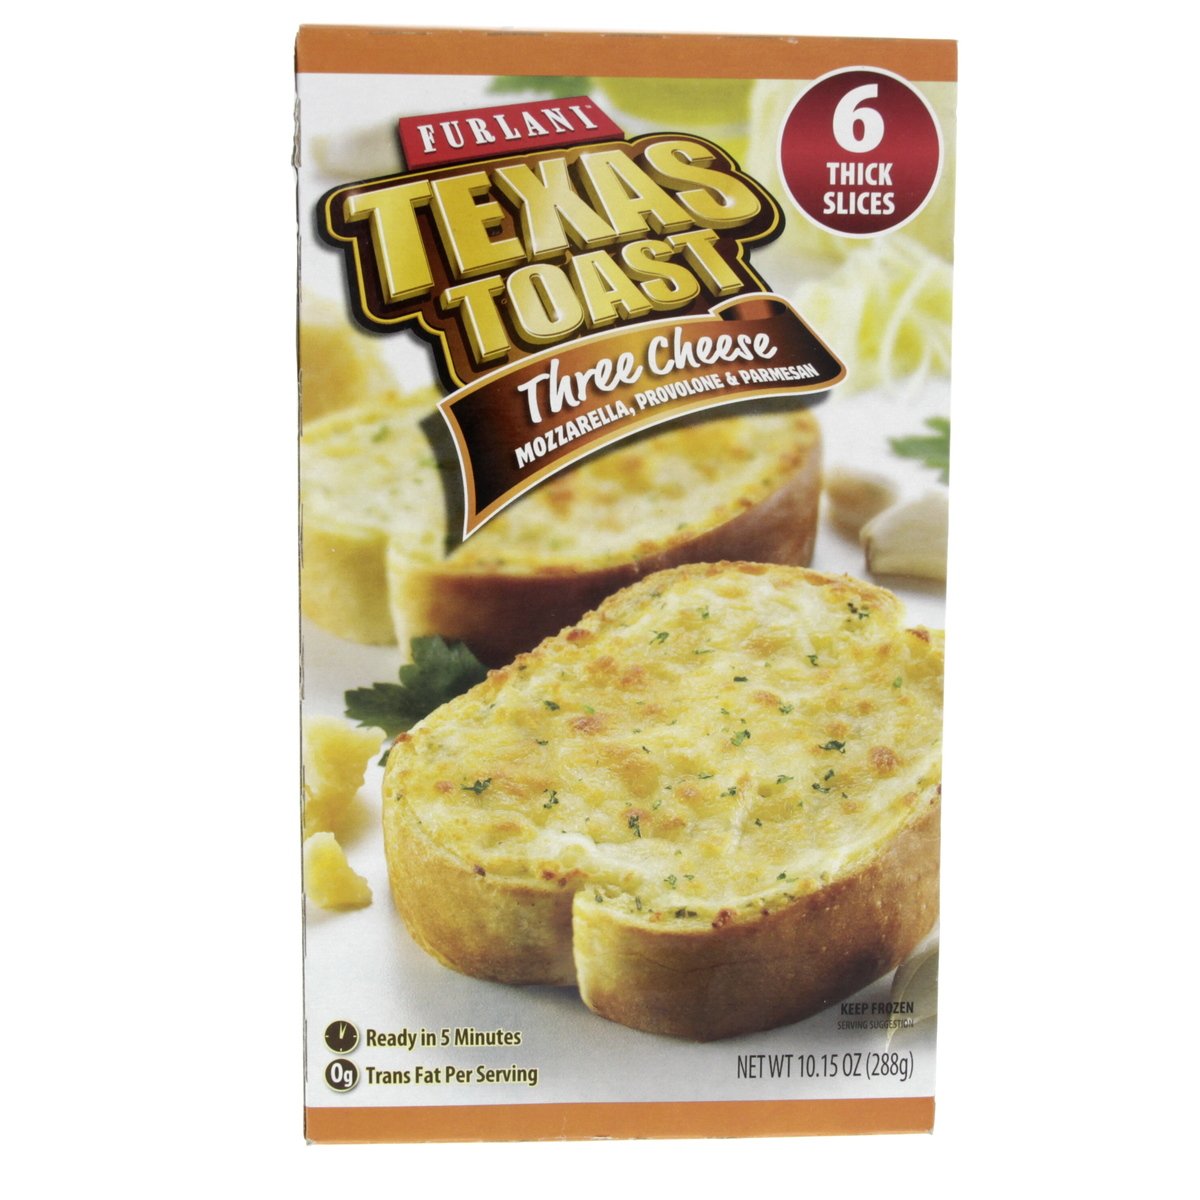 Furlani Texas Three Cheese toast 6 Thick Slices 288 g